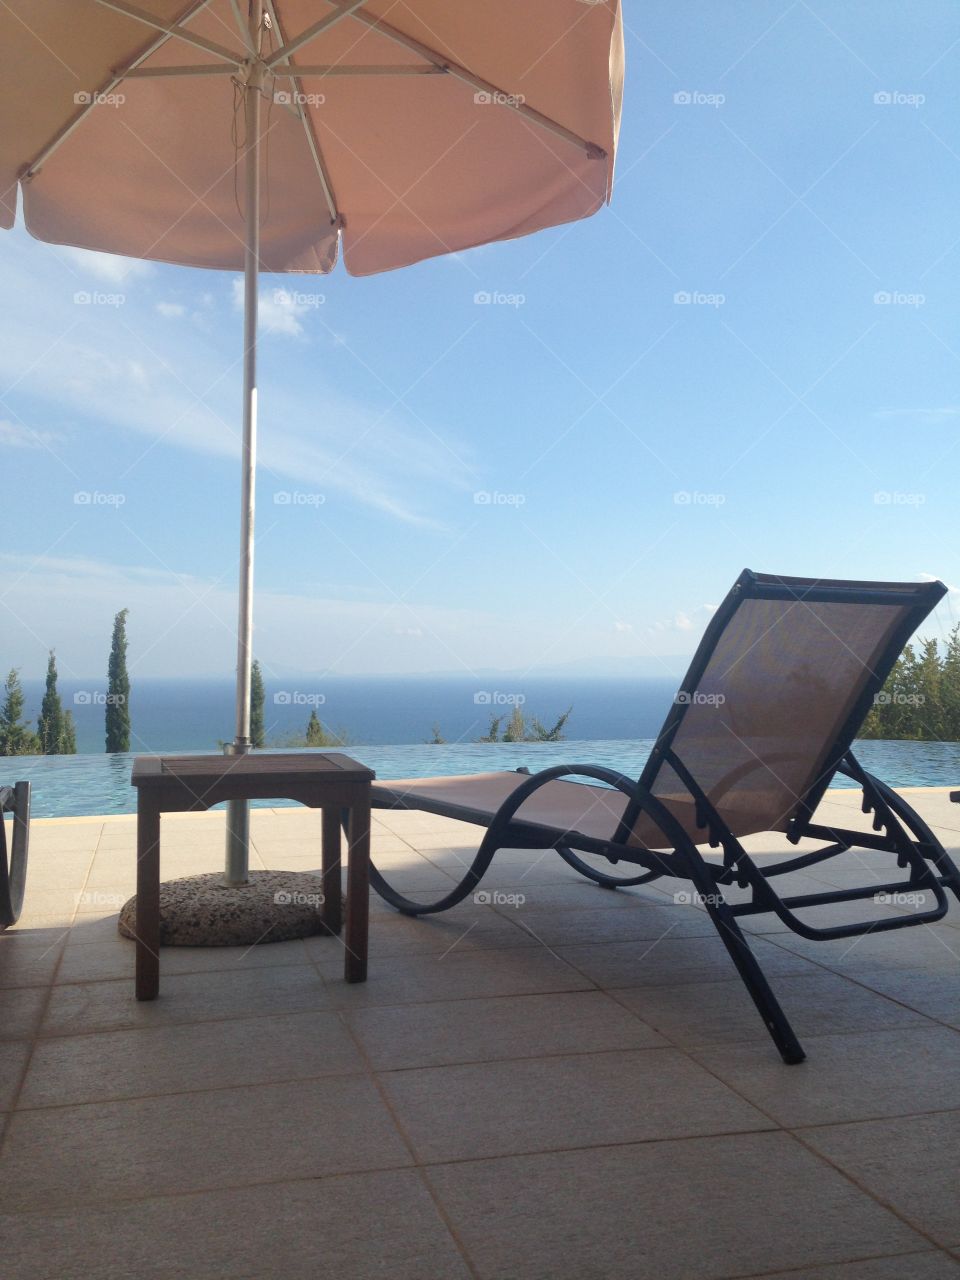 Kefalonia bliss. Summer holiday in kefalonia by the pool